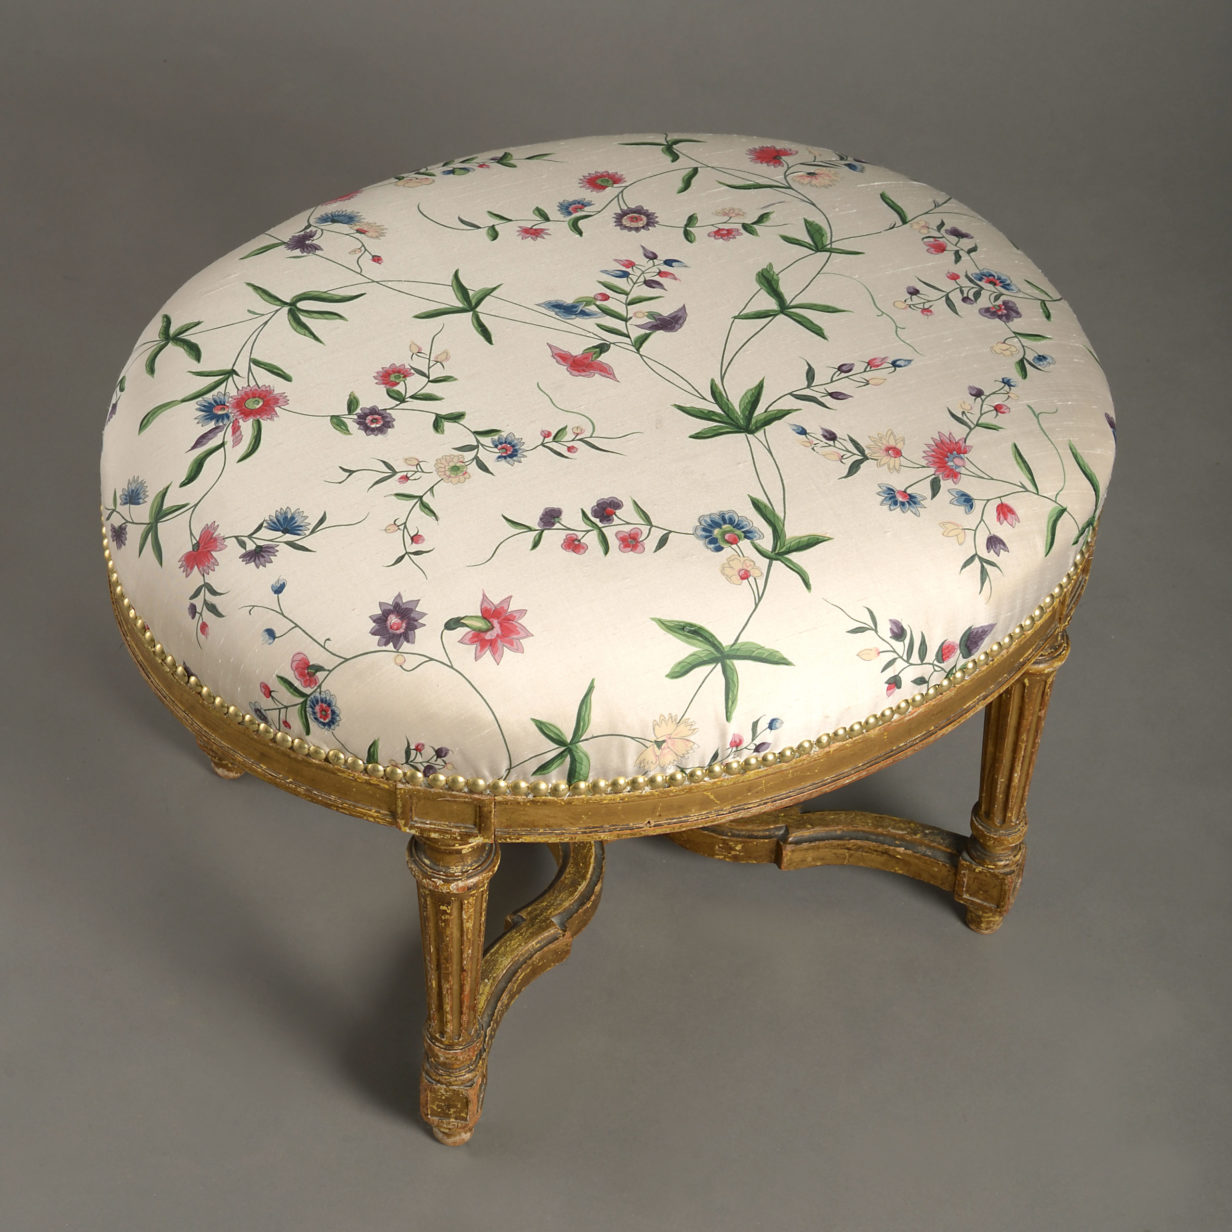 A late 18th century louis xvi period giltwood oval stool